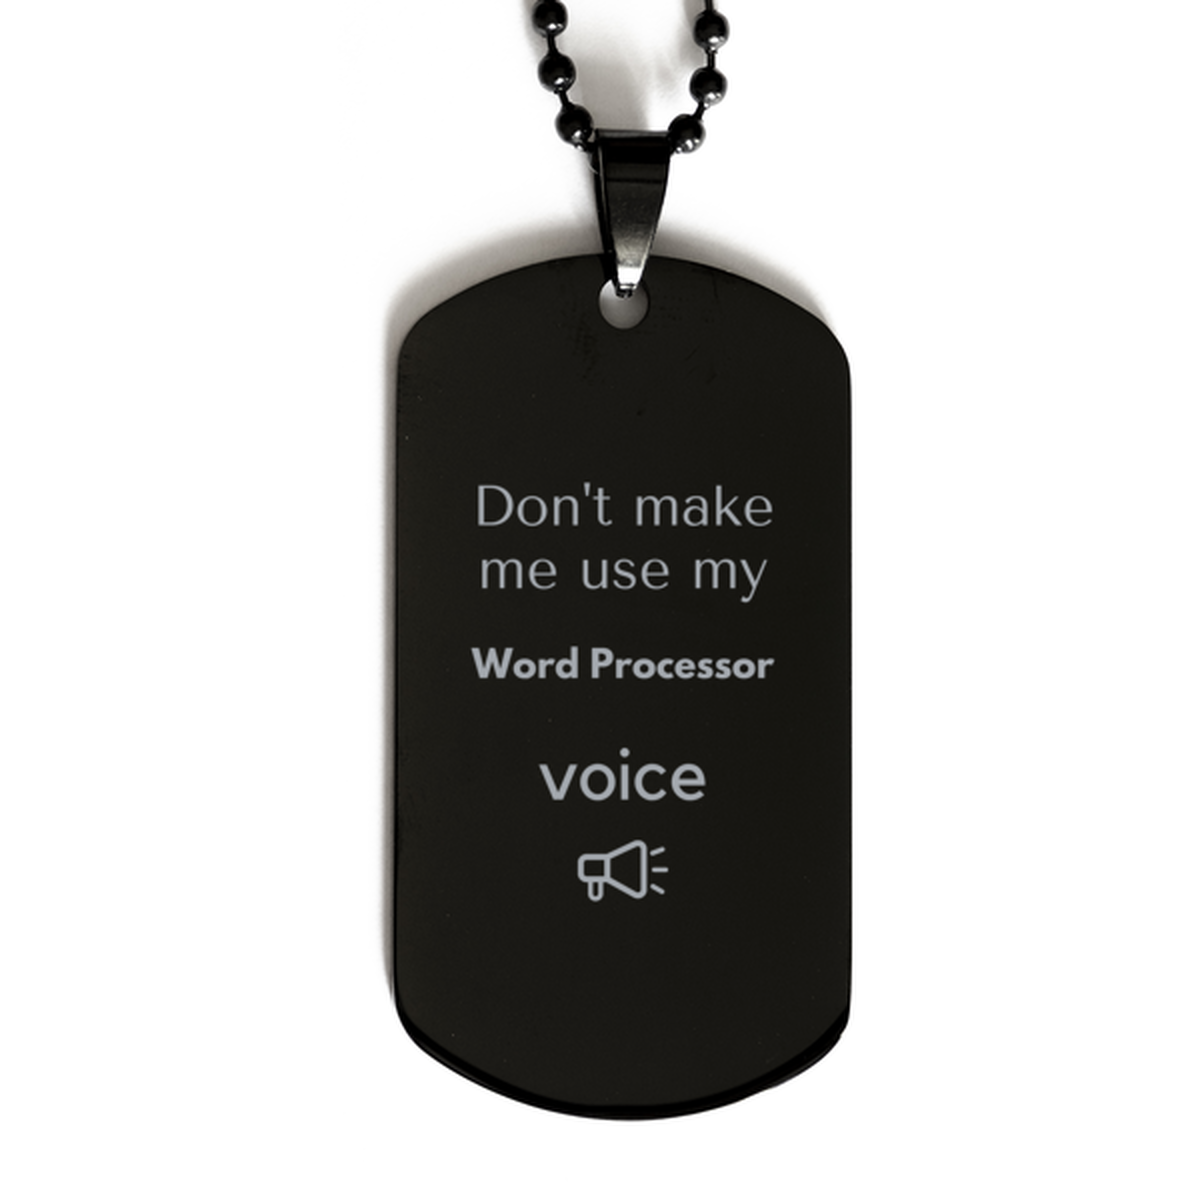 Don't make me use my Word Processor voice, Sarcasm Word Processor Gifts, Christmas Word Processor Black Dog Tag Birthday Unique Gifts For Word Processor Coworkers, Men, Women, Colleague, Friends